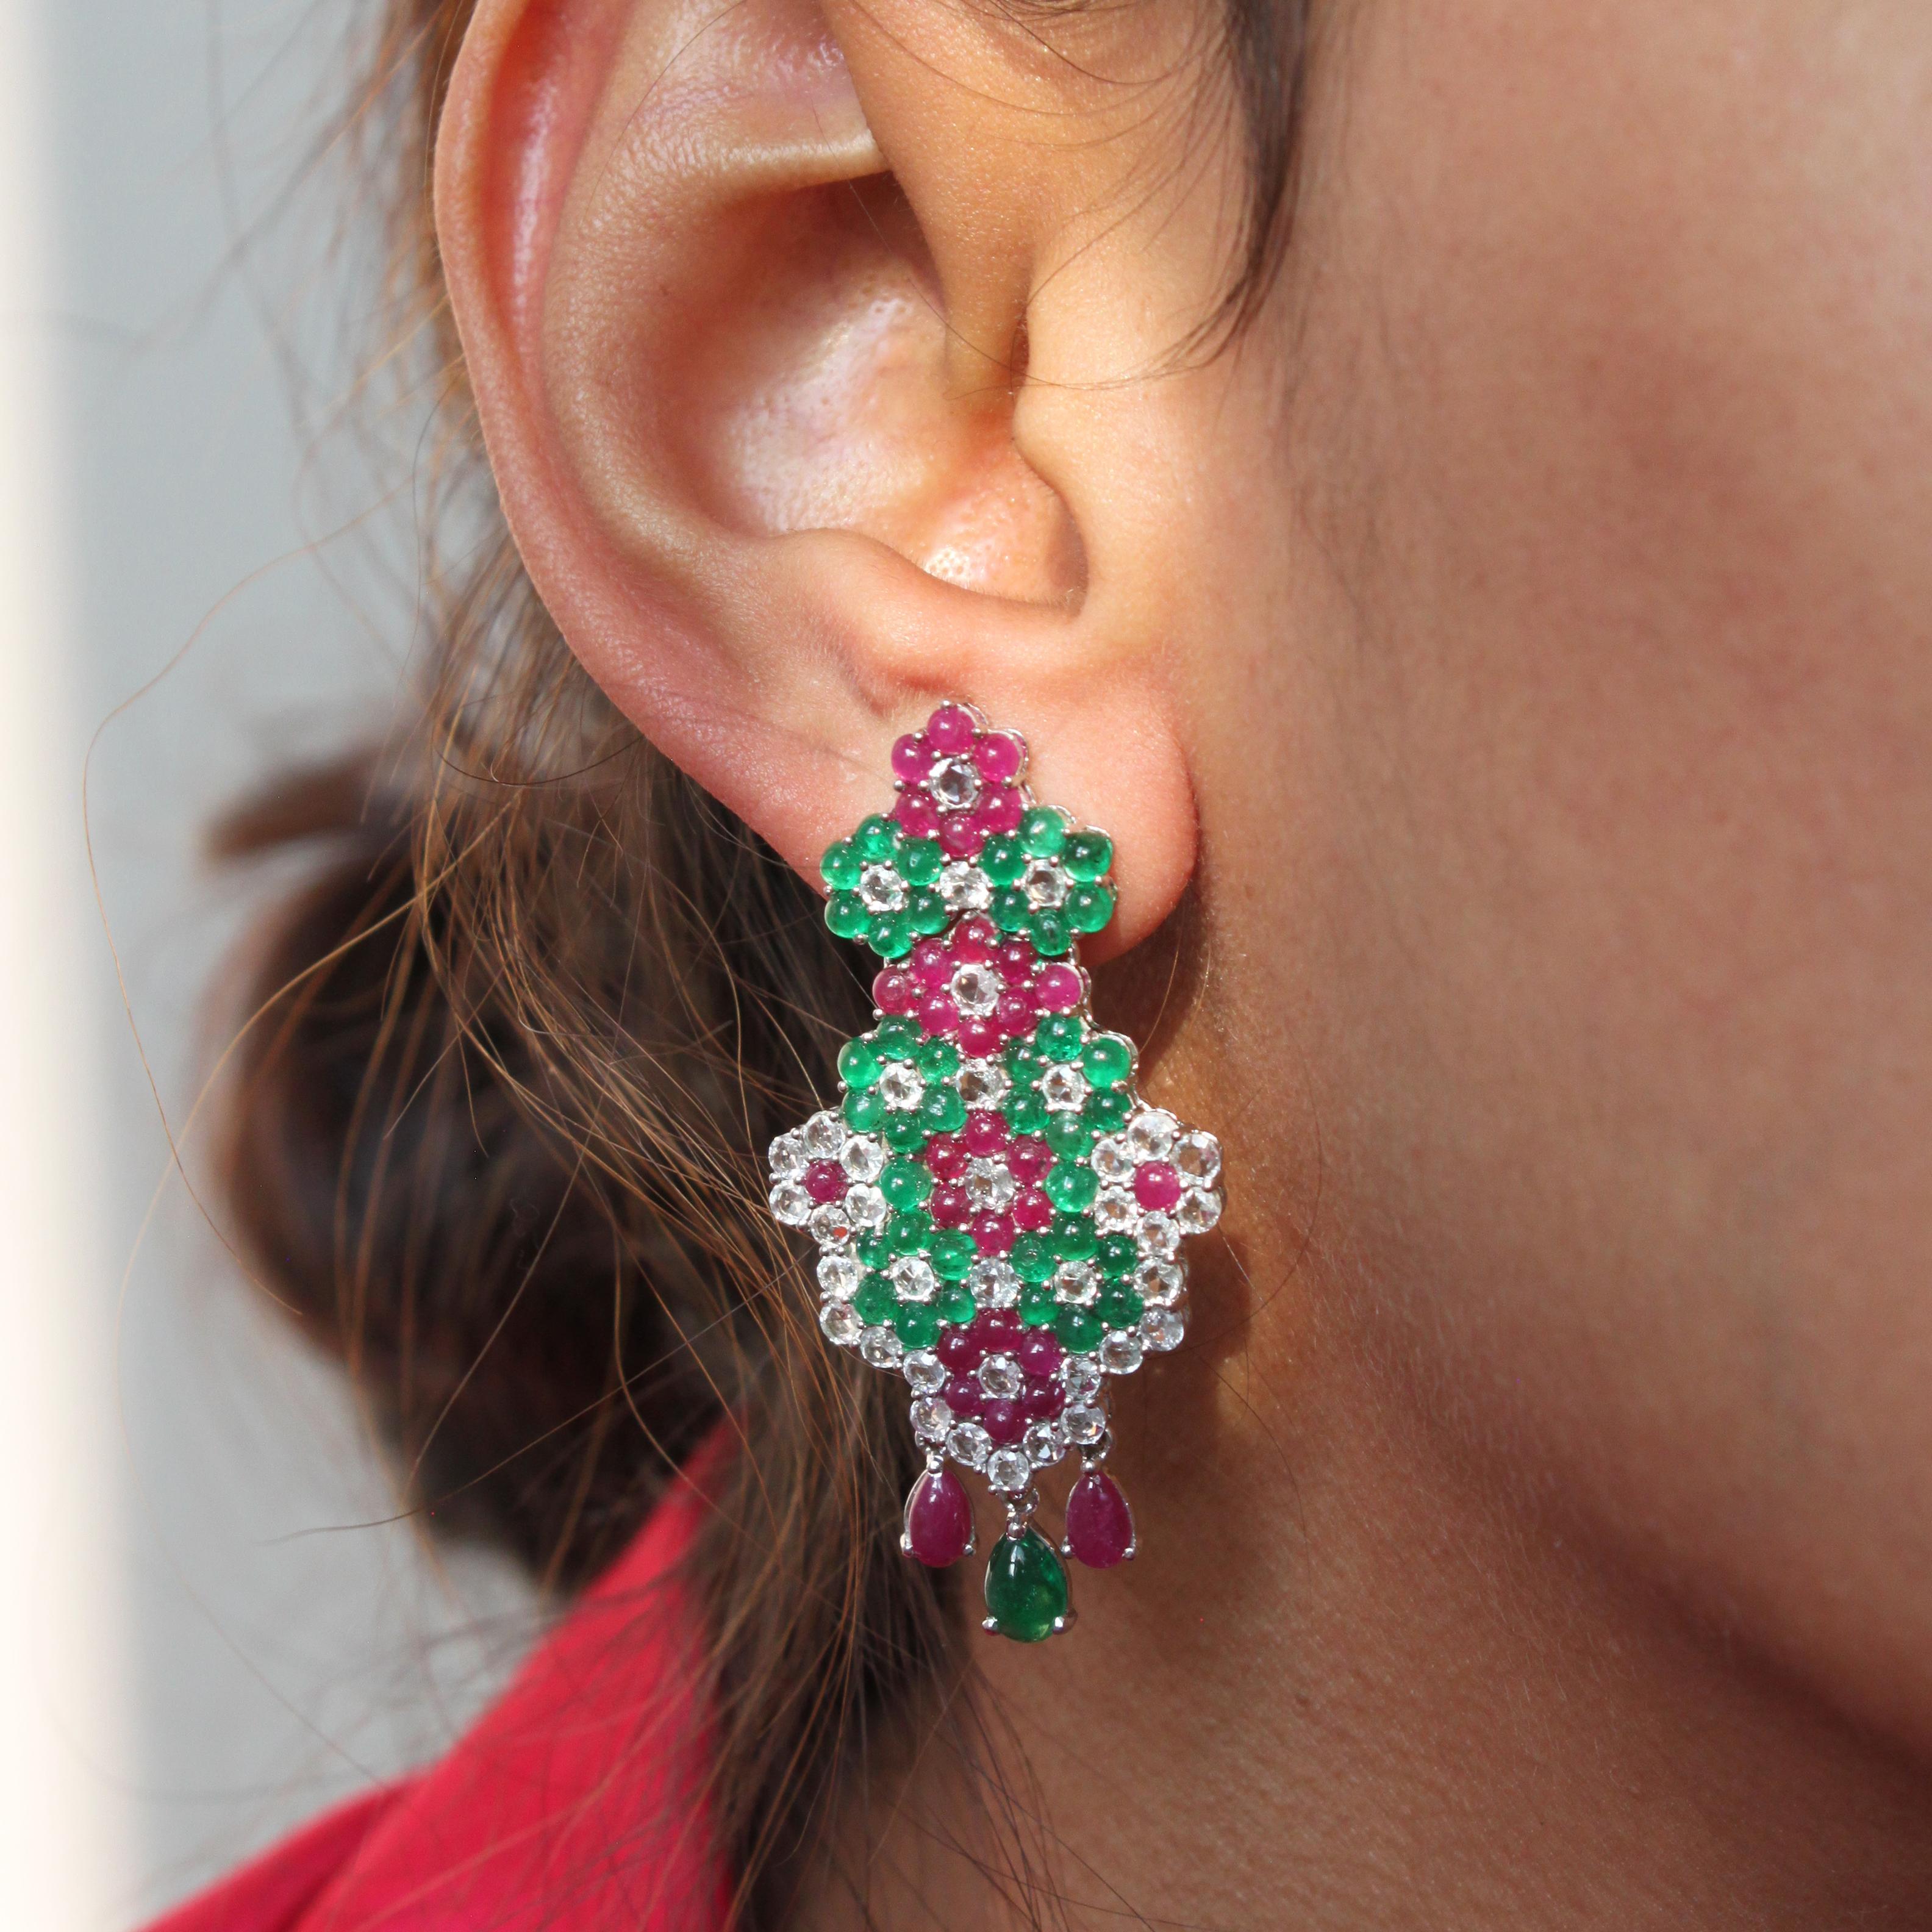 14K white gold
5.56ct natural emerald cabochon
5.25ct natural ruby cabochon
3.7ct natural white sapphire
Total earring weight 15.40g

A pair of dazzling earrings crafted from 14K white gold and adorned with precious gemstones. The earrings feature